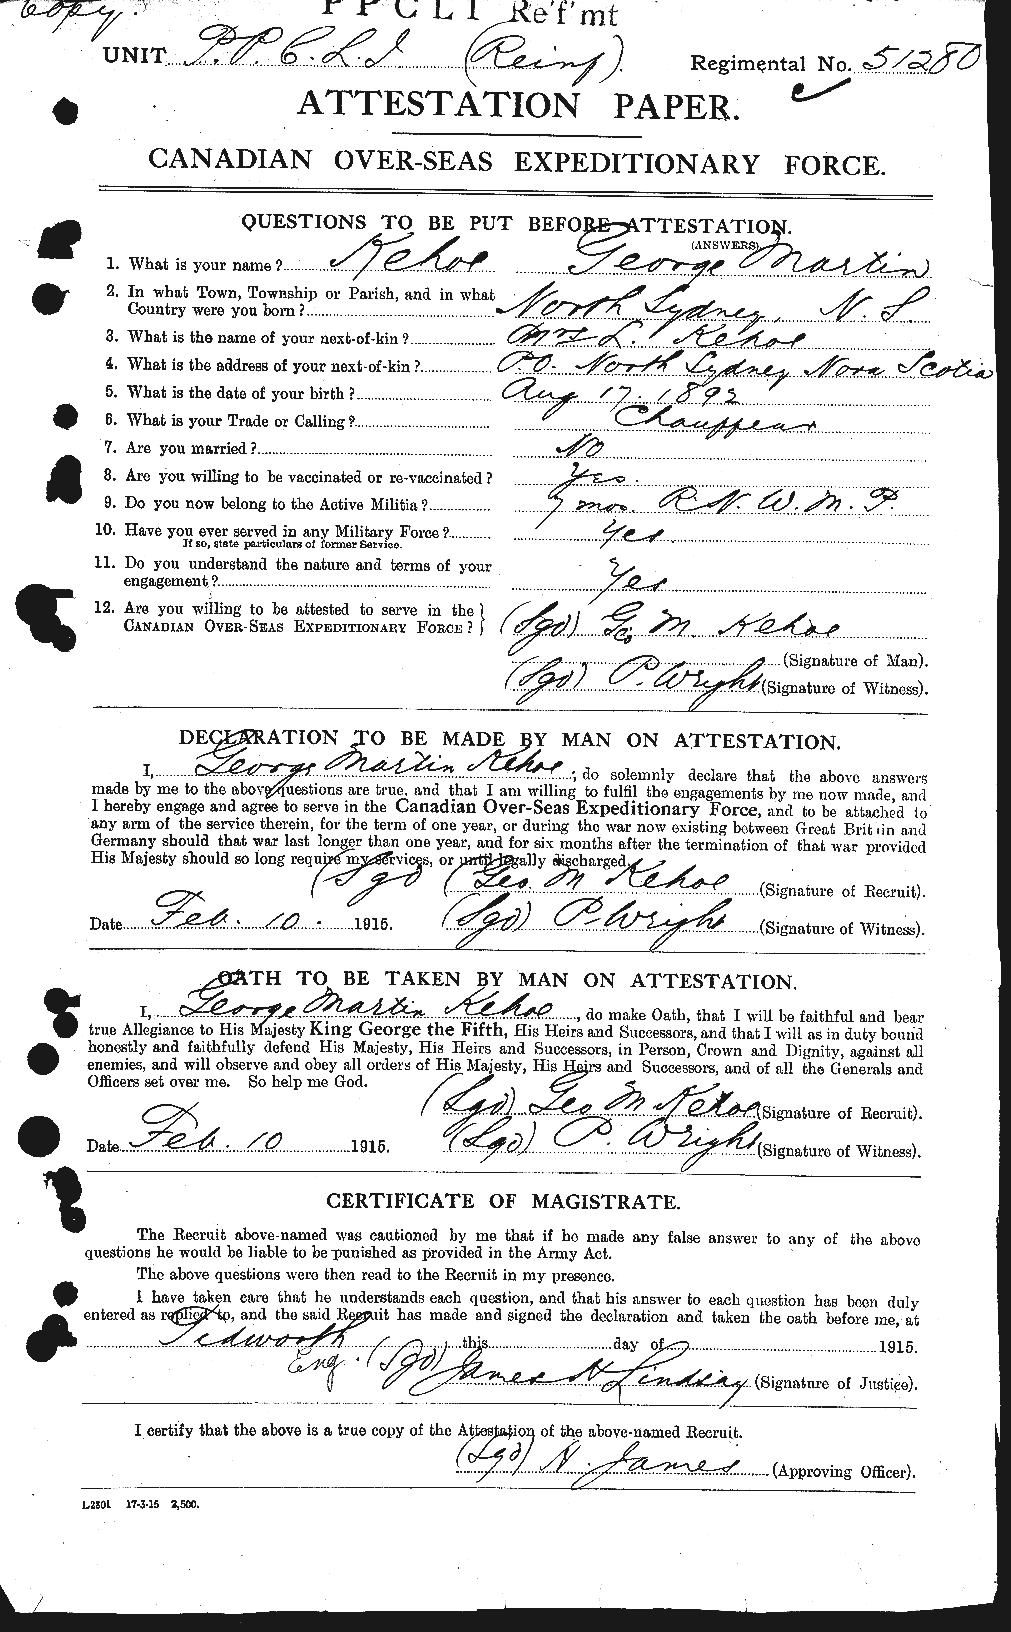 Personnel Records of the First World War - CEF 432206a